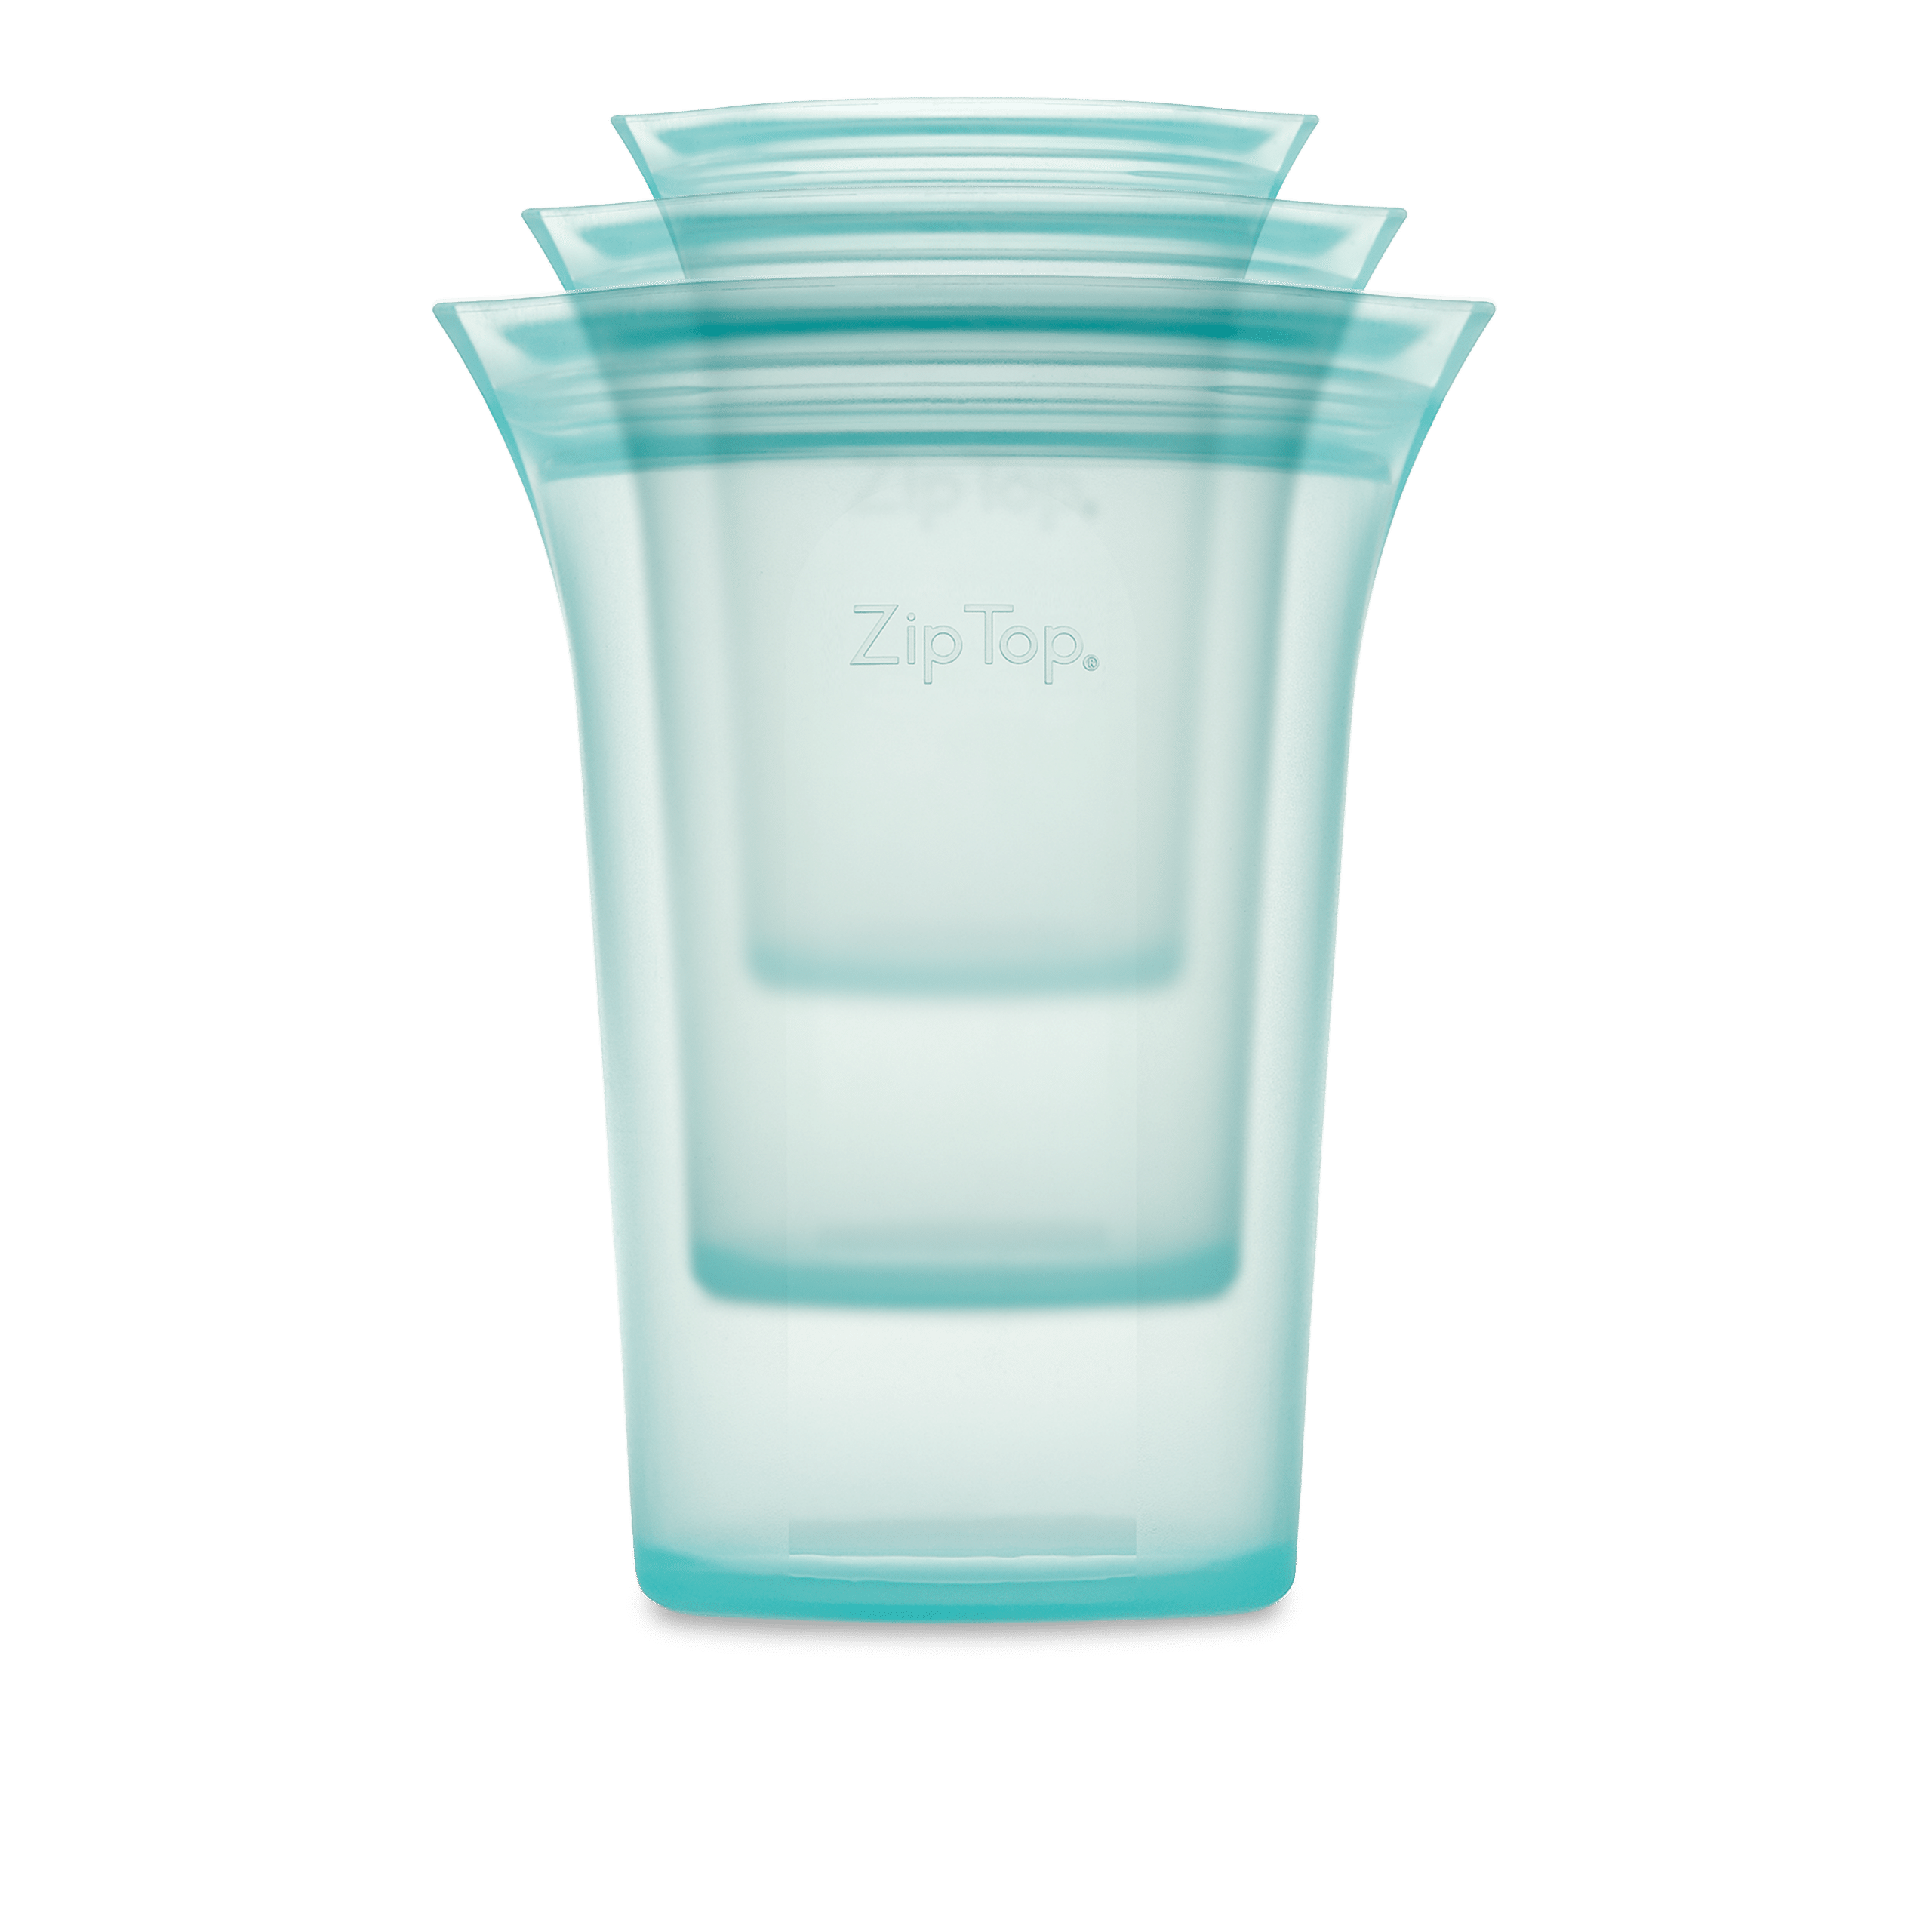 Zip Top Cups from Gimme the Good